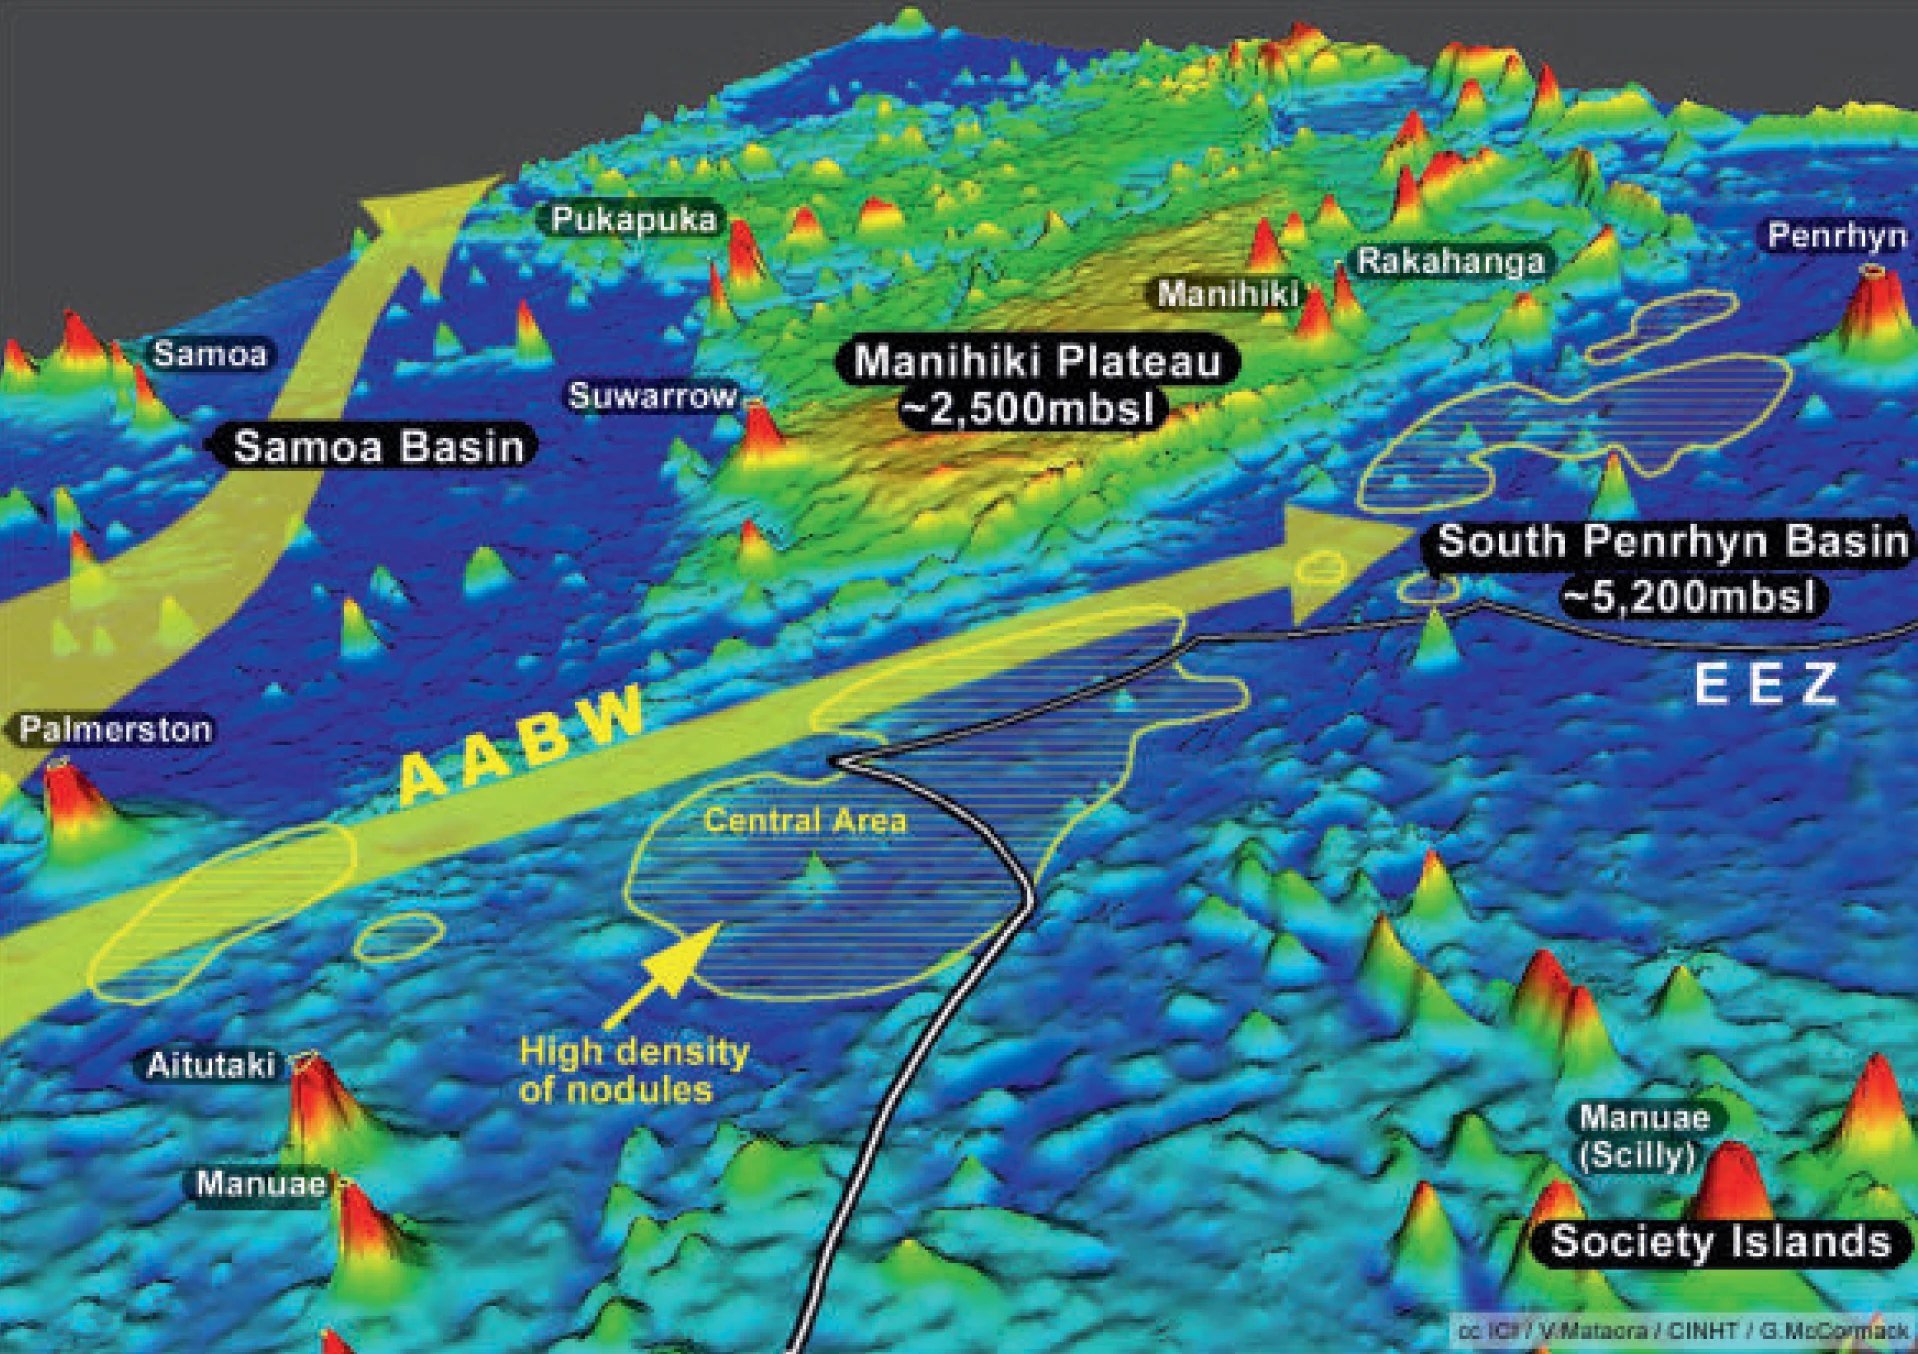 Subsea image of the South Penrhyn Basin